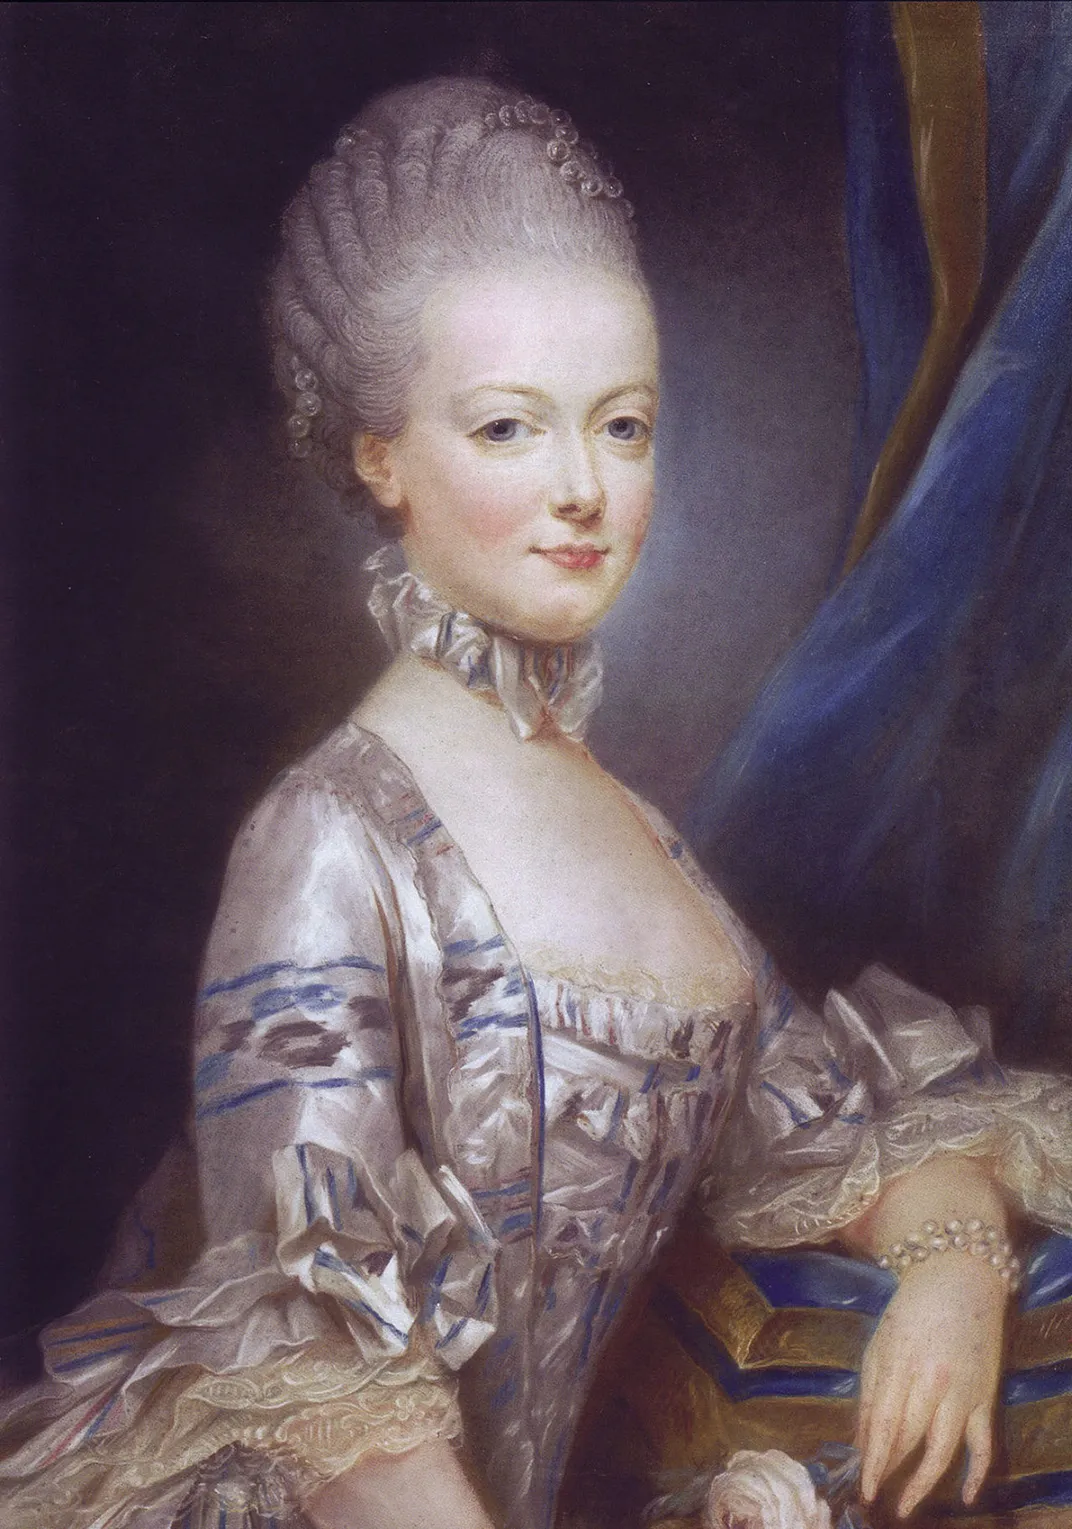 Marie Antoinette at age 13